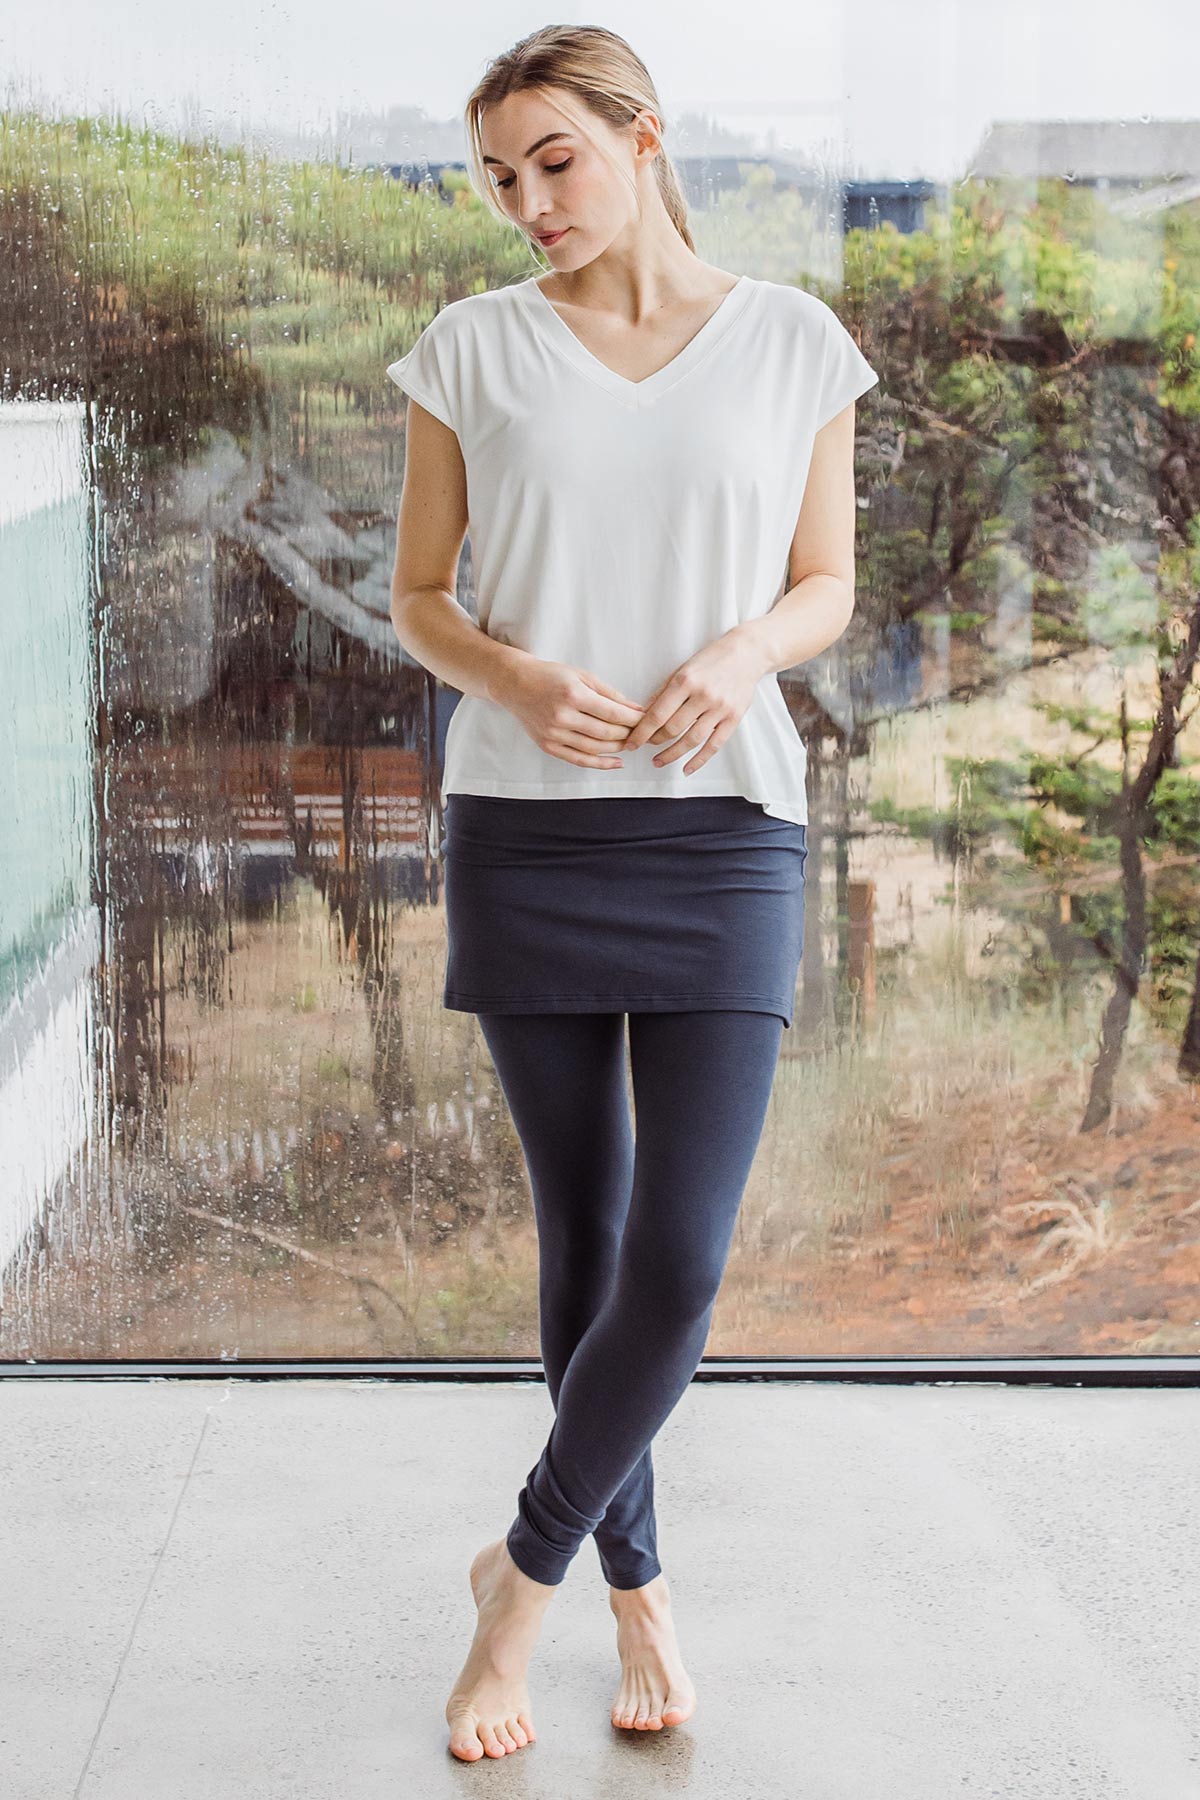 Our Point of View on Promover Women's Bootcut Yoga Pants From